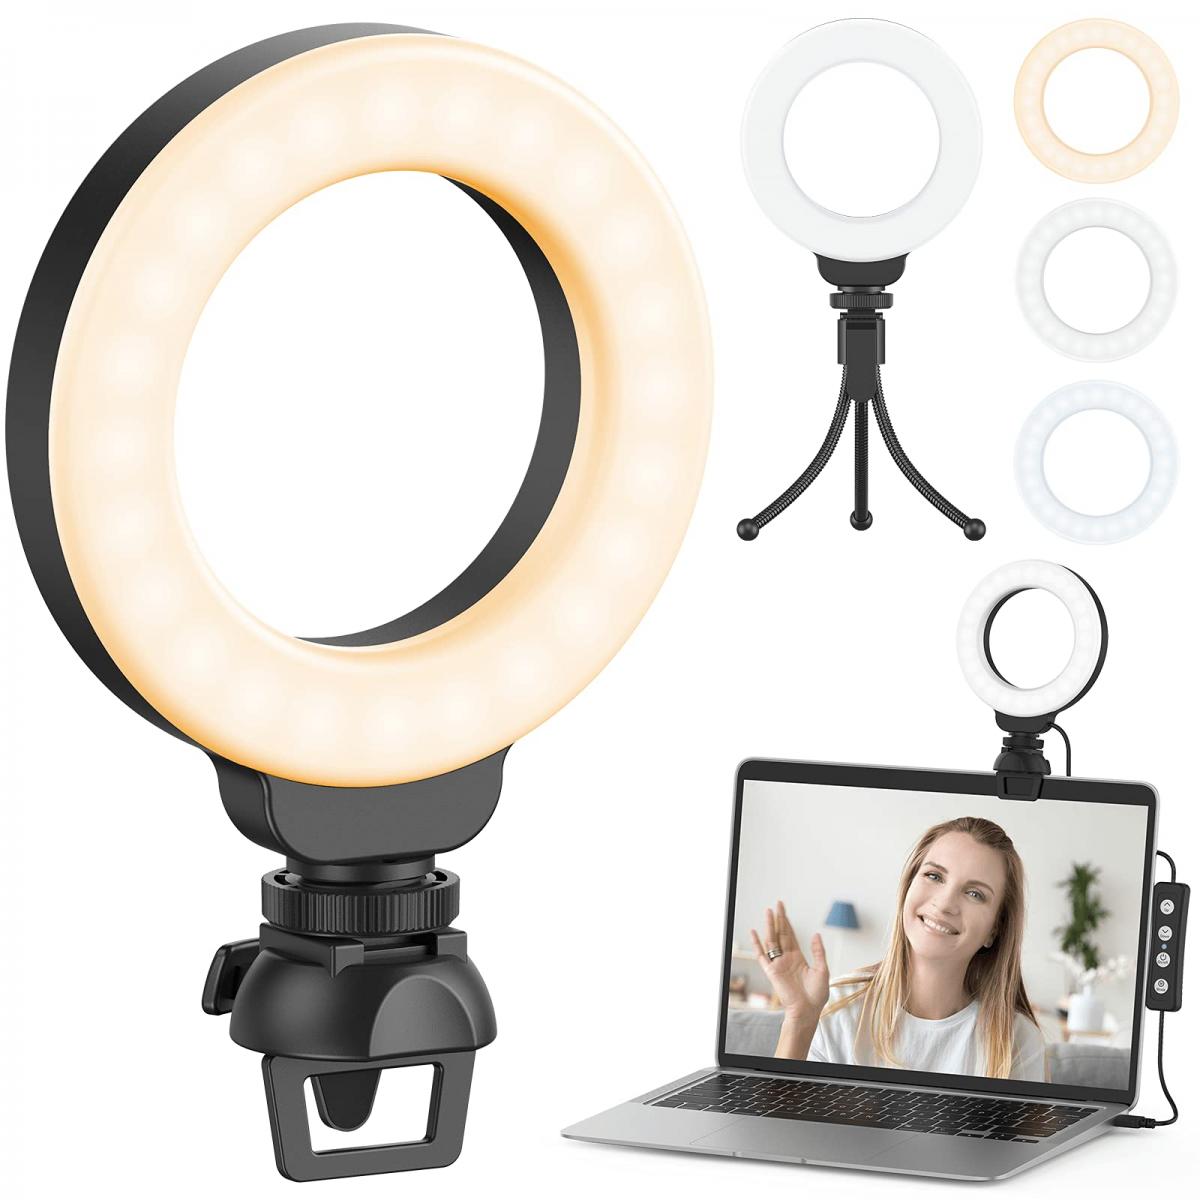 4 USB Powered Ring Multi-Functional Fill Light with Clip and